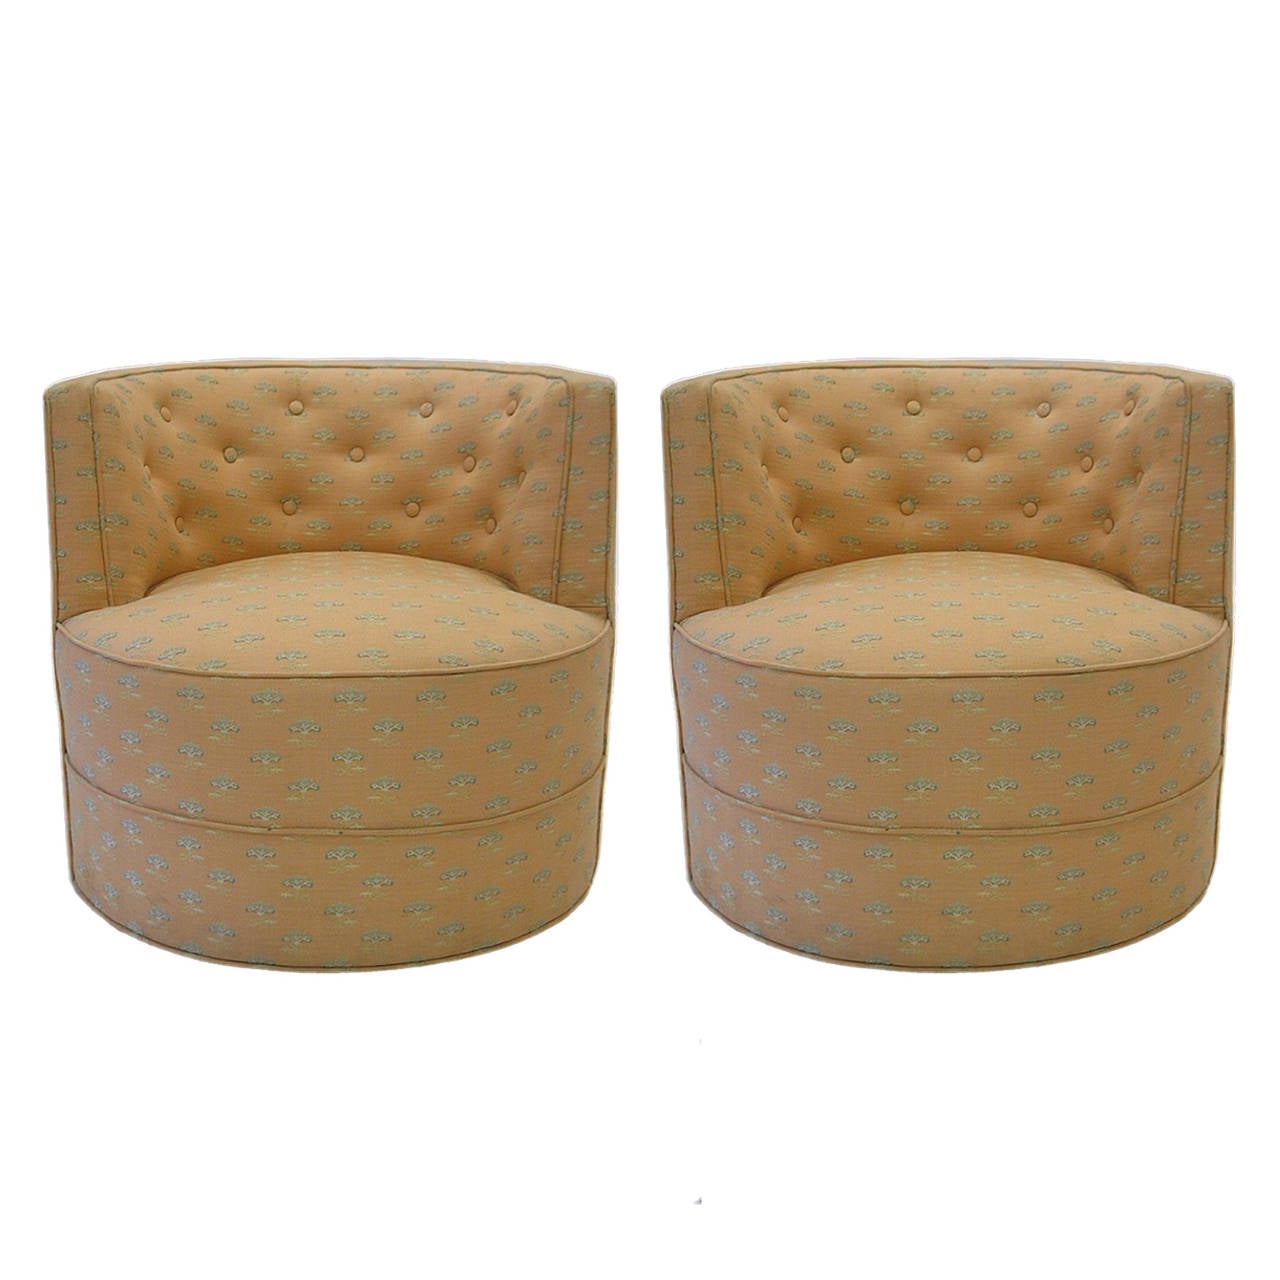 Pair of tufted upholstered tub chairs on wheels.